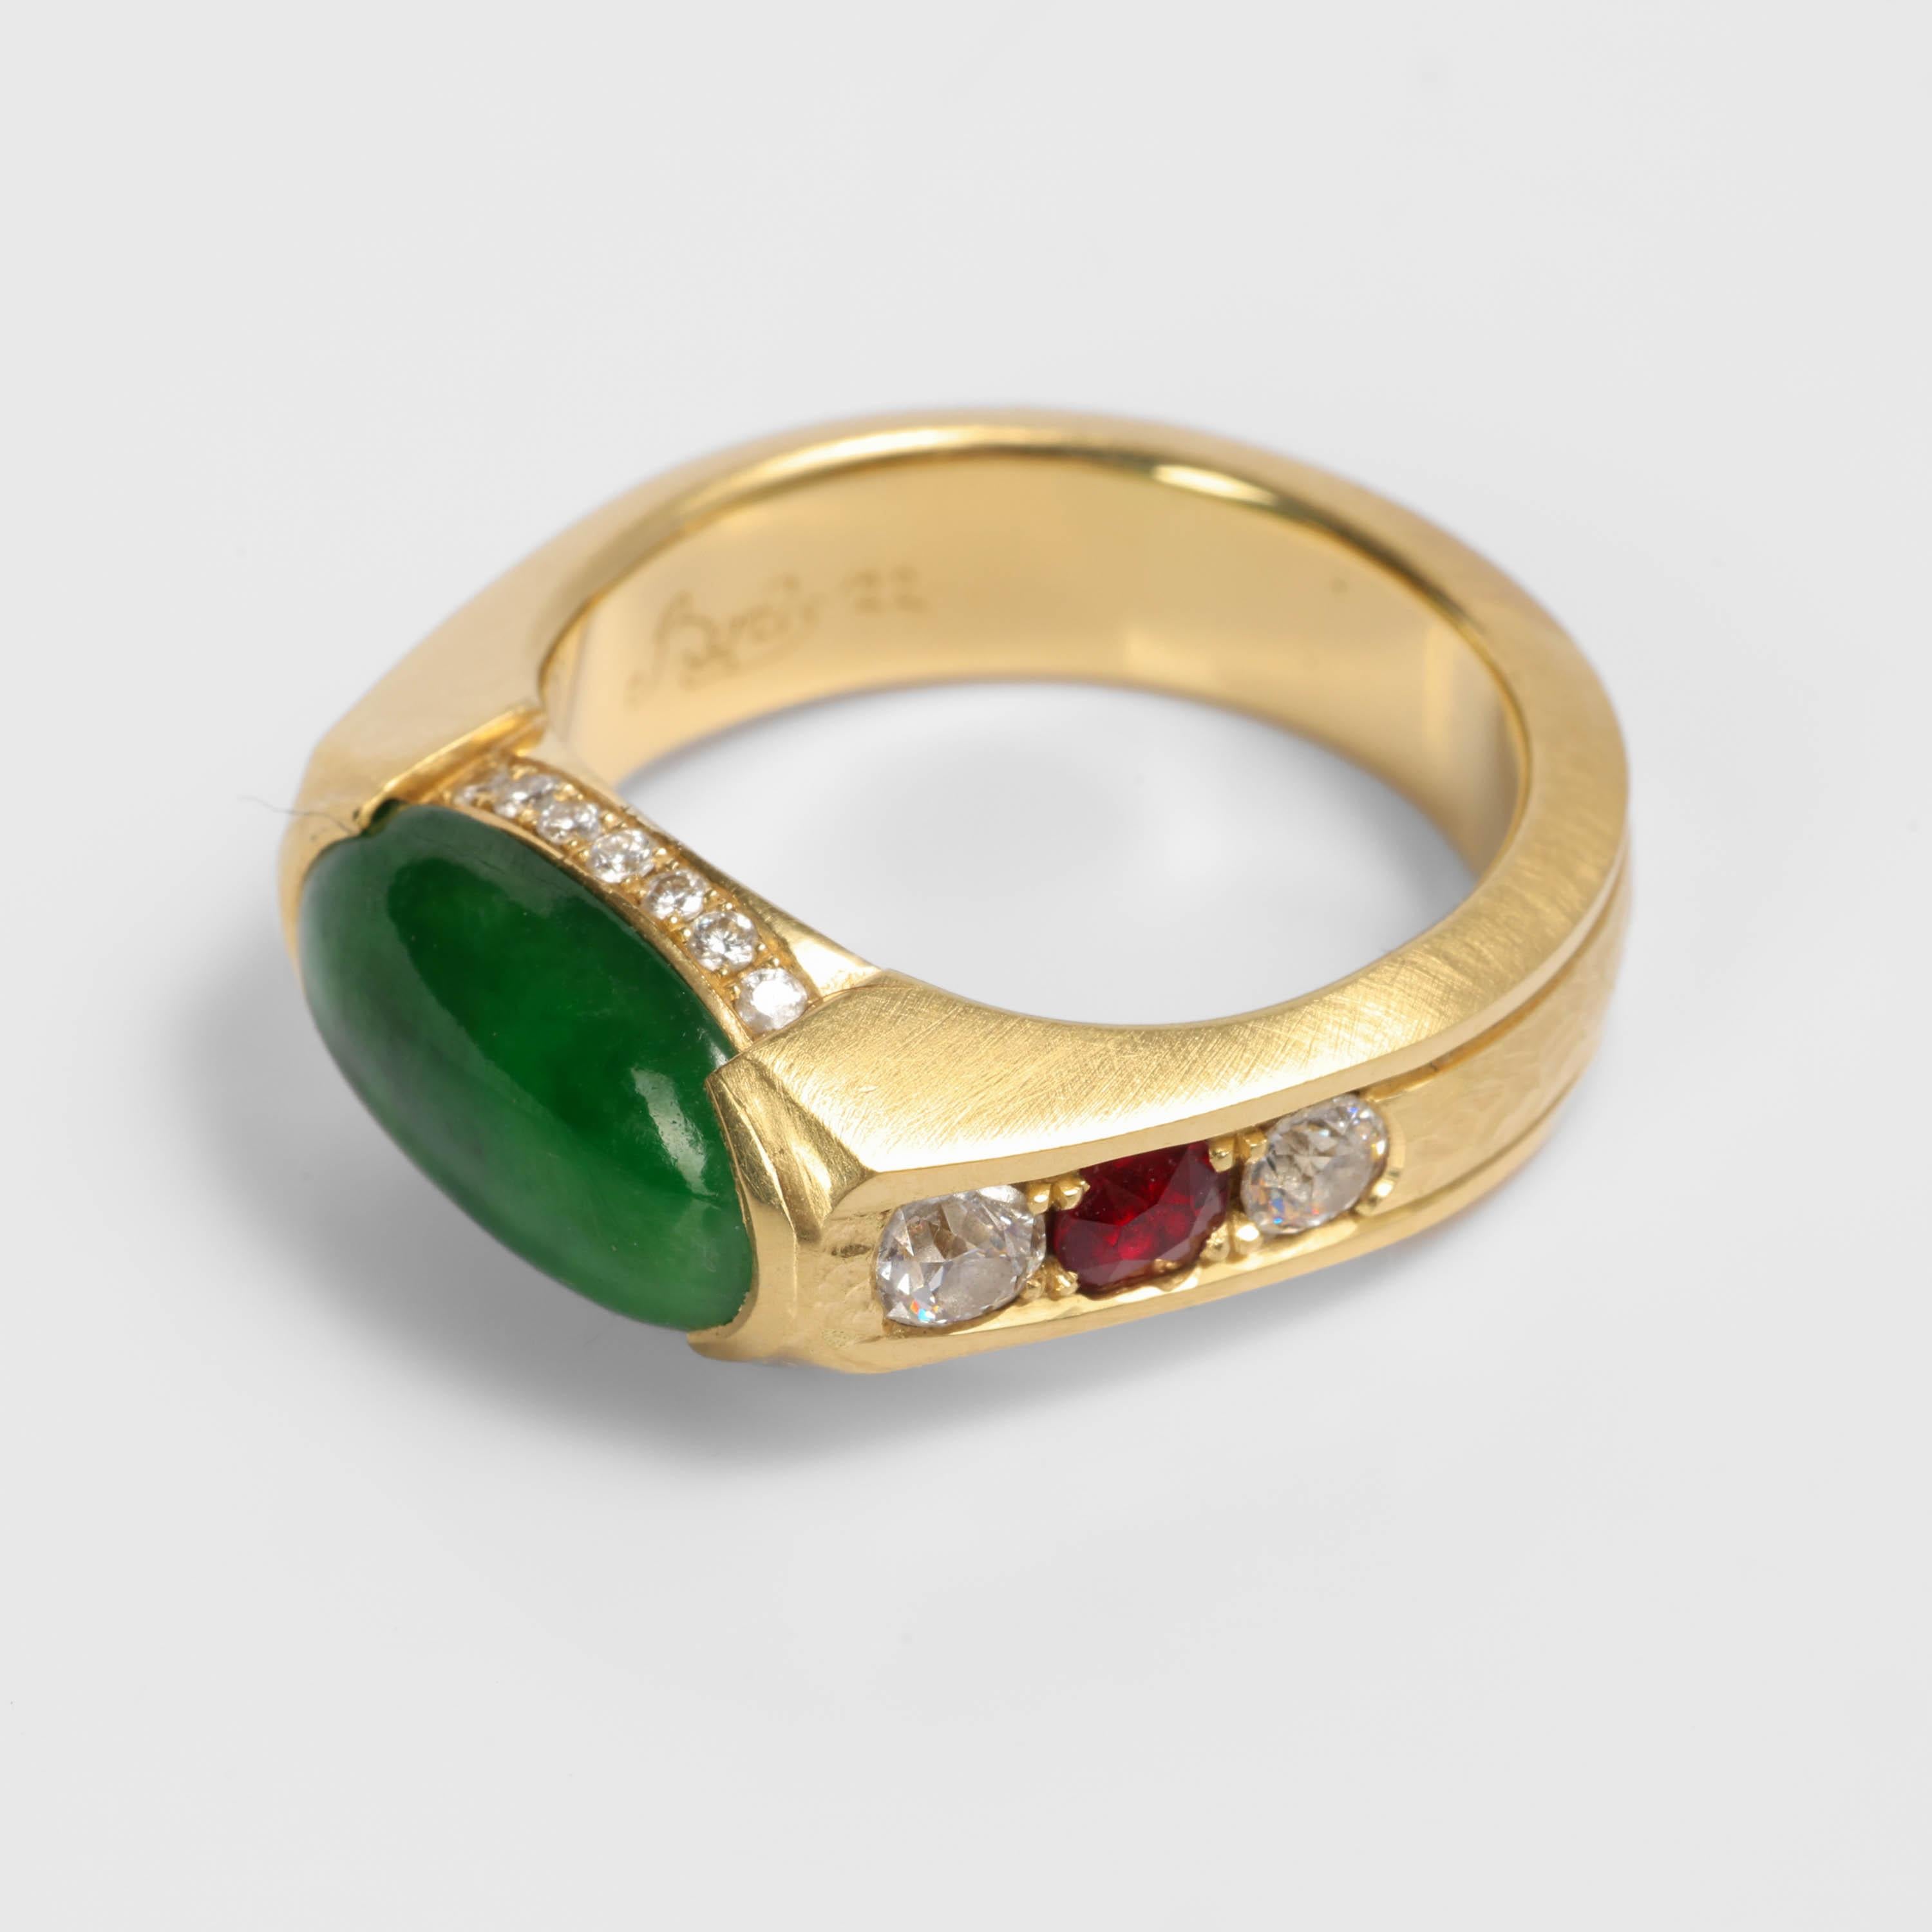 This custom, handmade jade ring features an antique, old-mine deep 